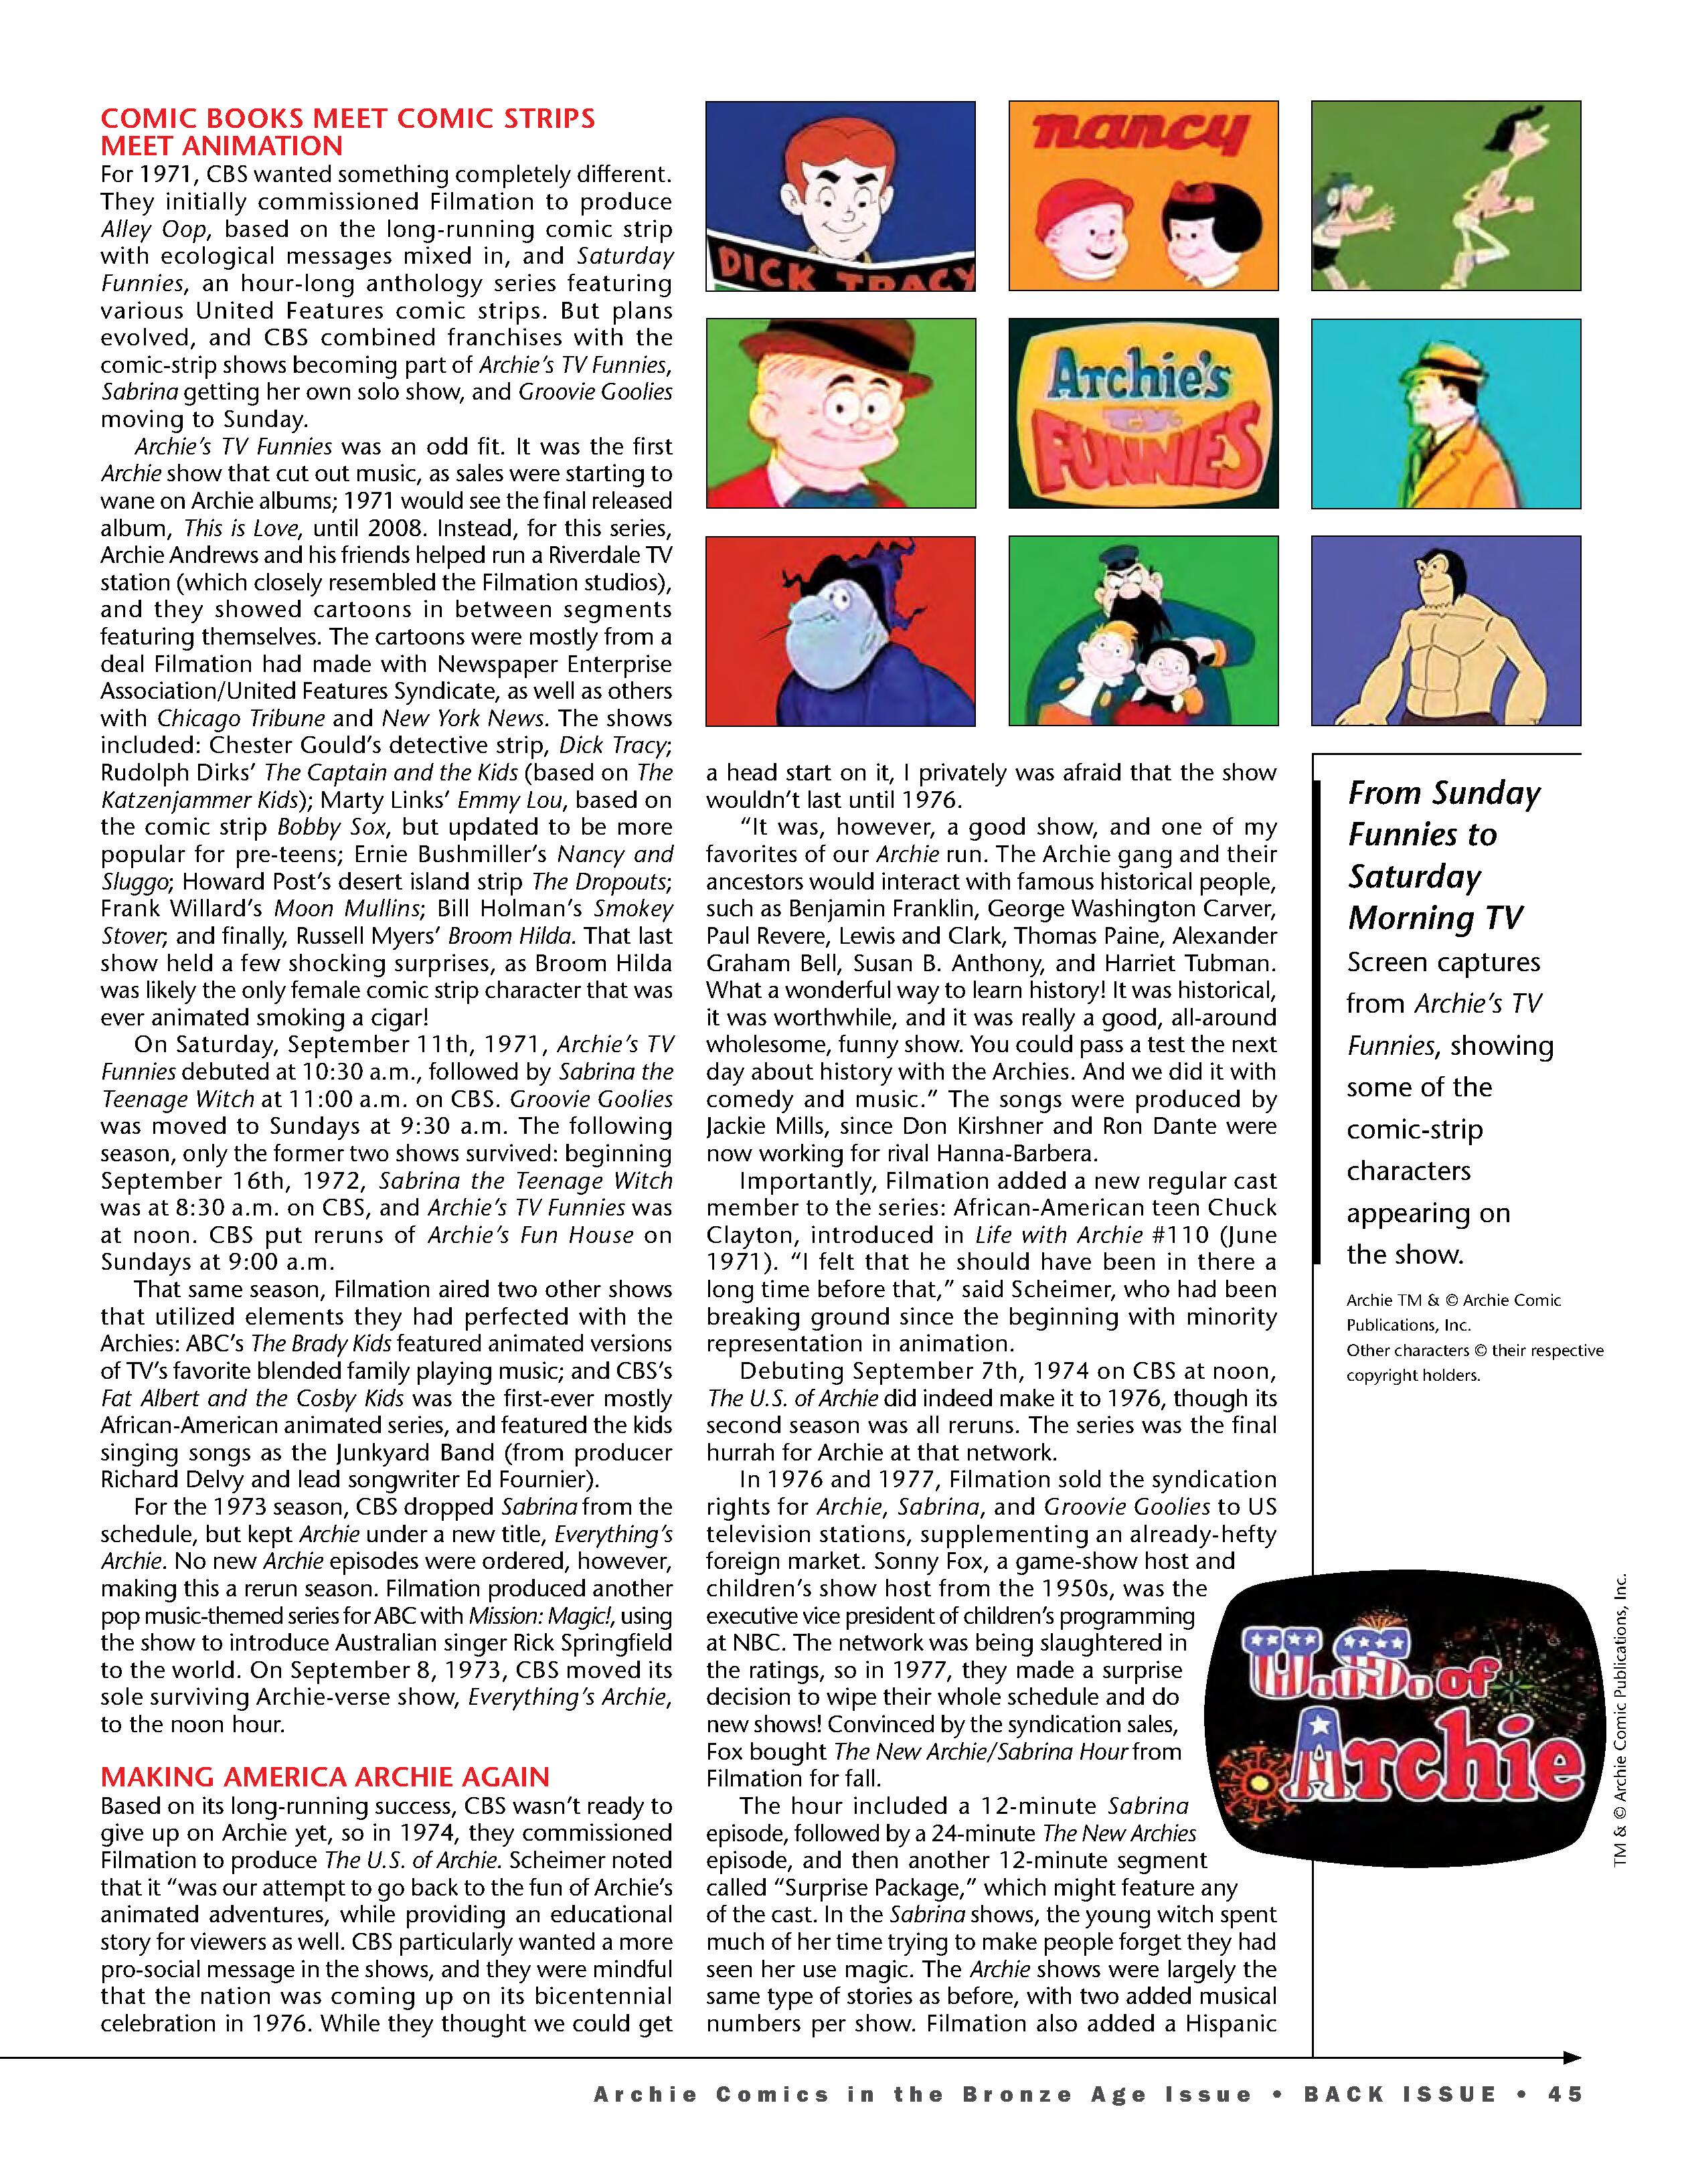 Read online Back Issue comic -  Issue #107 - 47